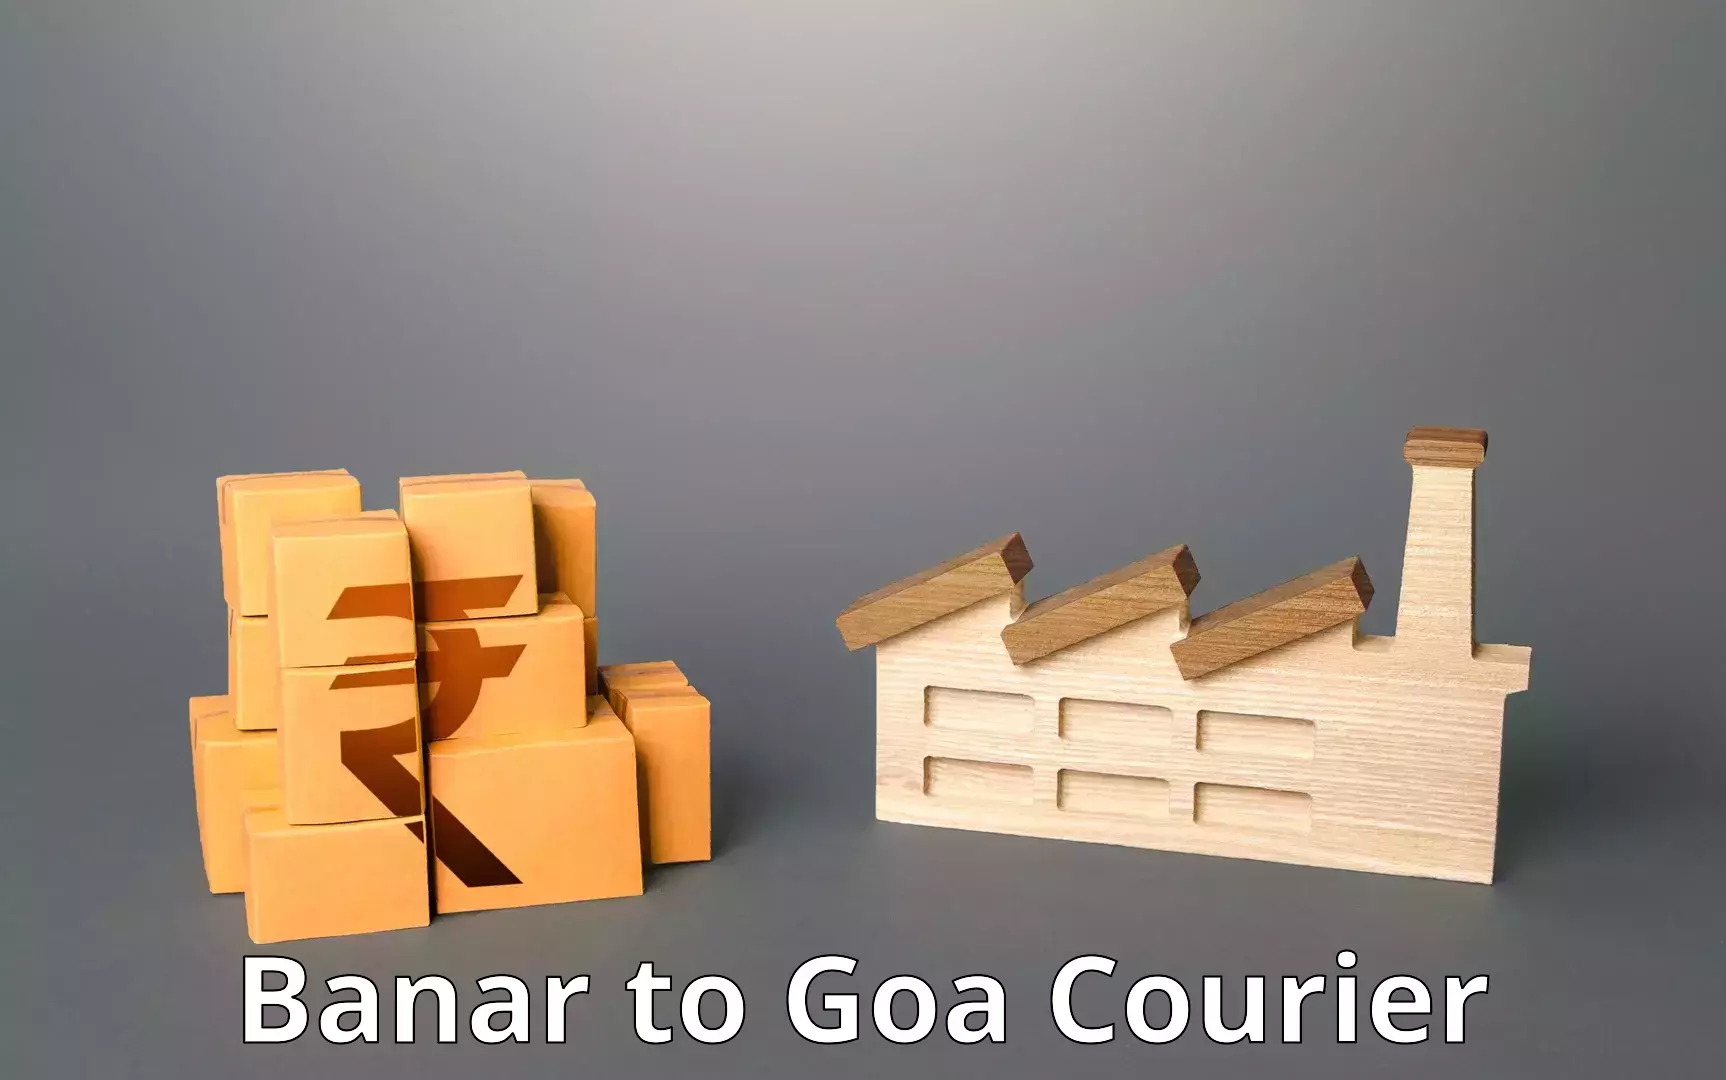 Reliable delivery network Banar to Goa